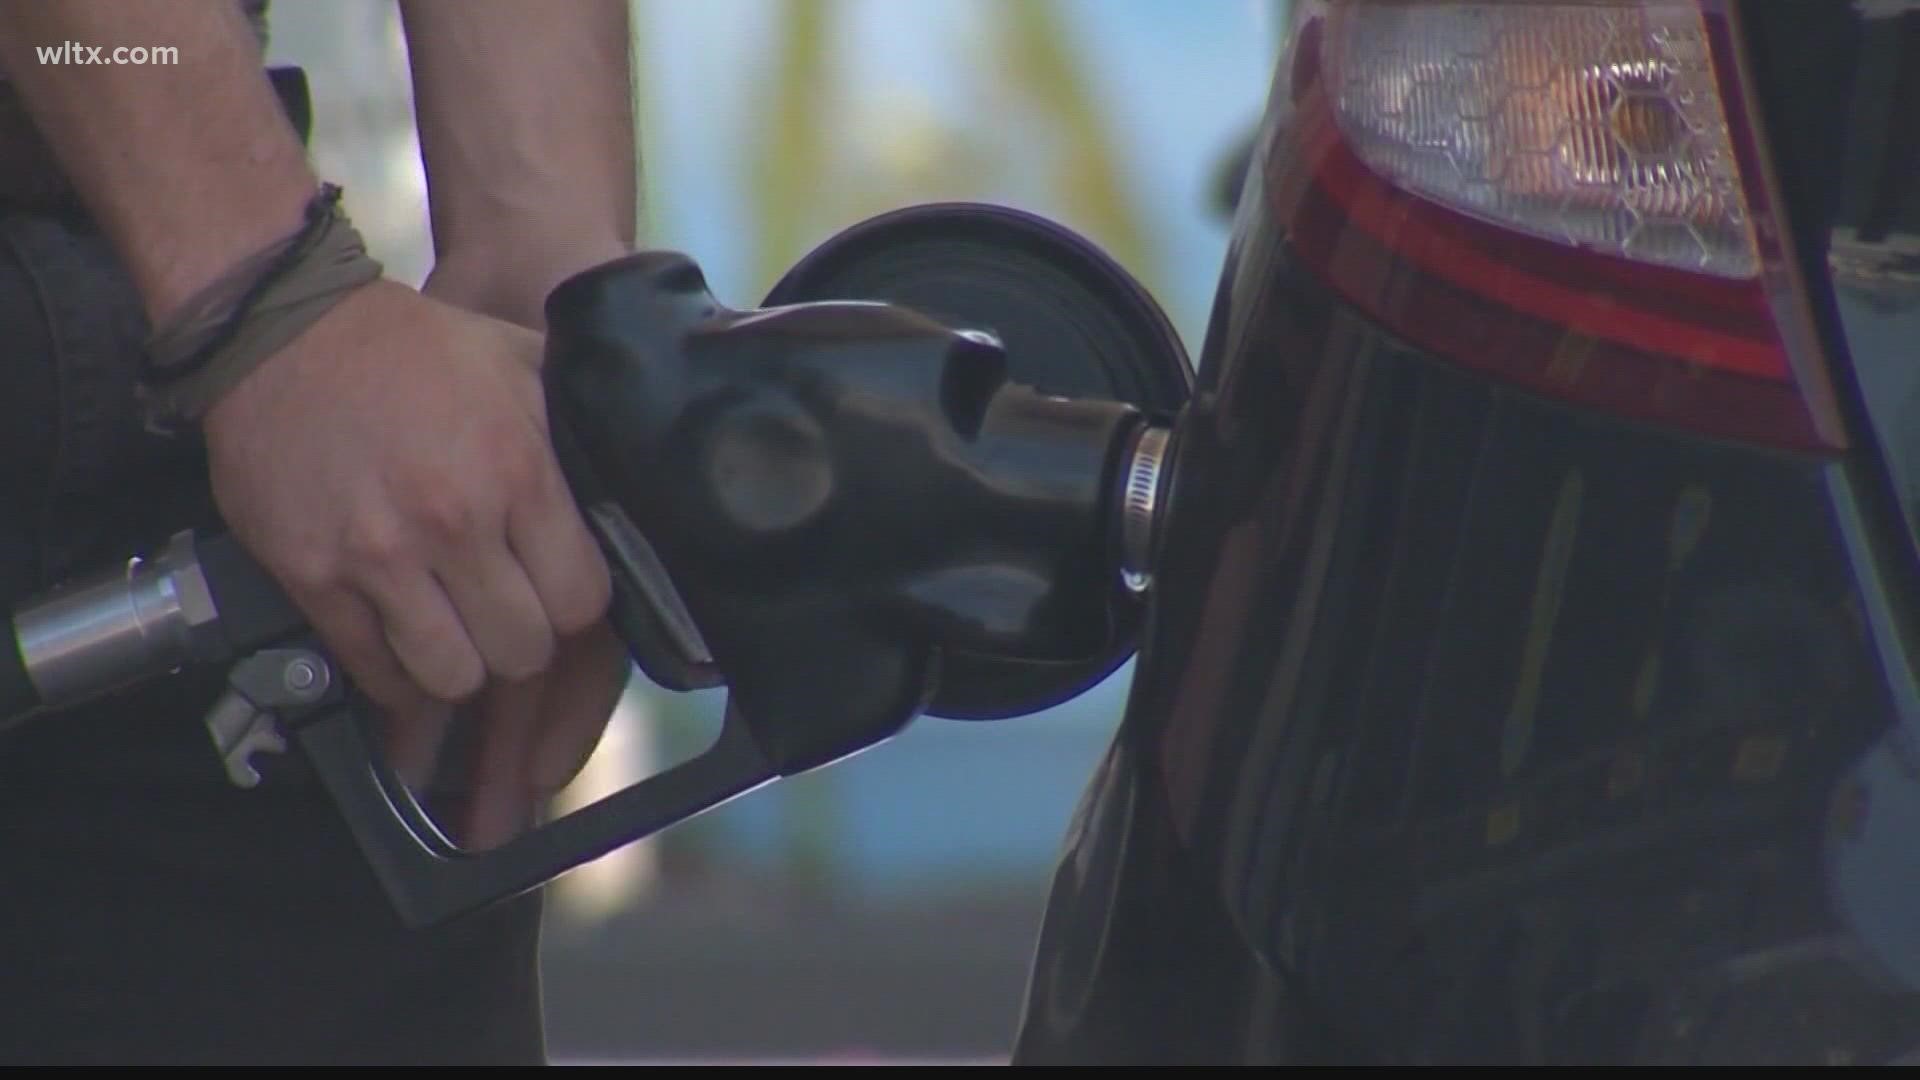 June is when many take summer vacation, but the higher price of gas may force some to rethink those plans.